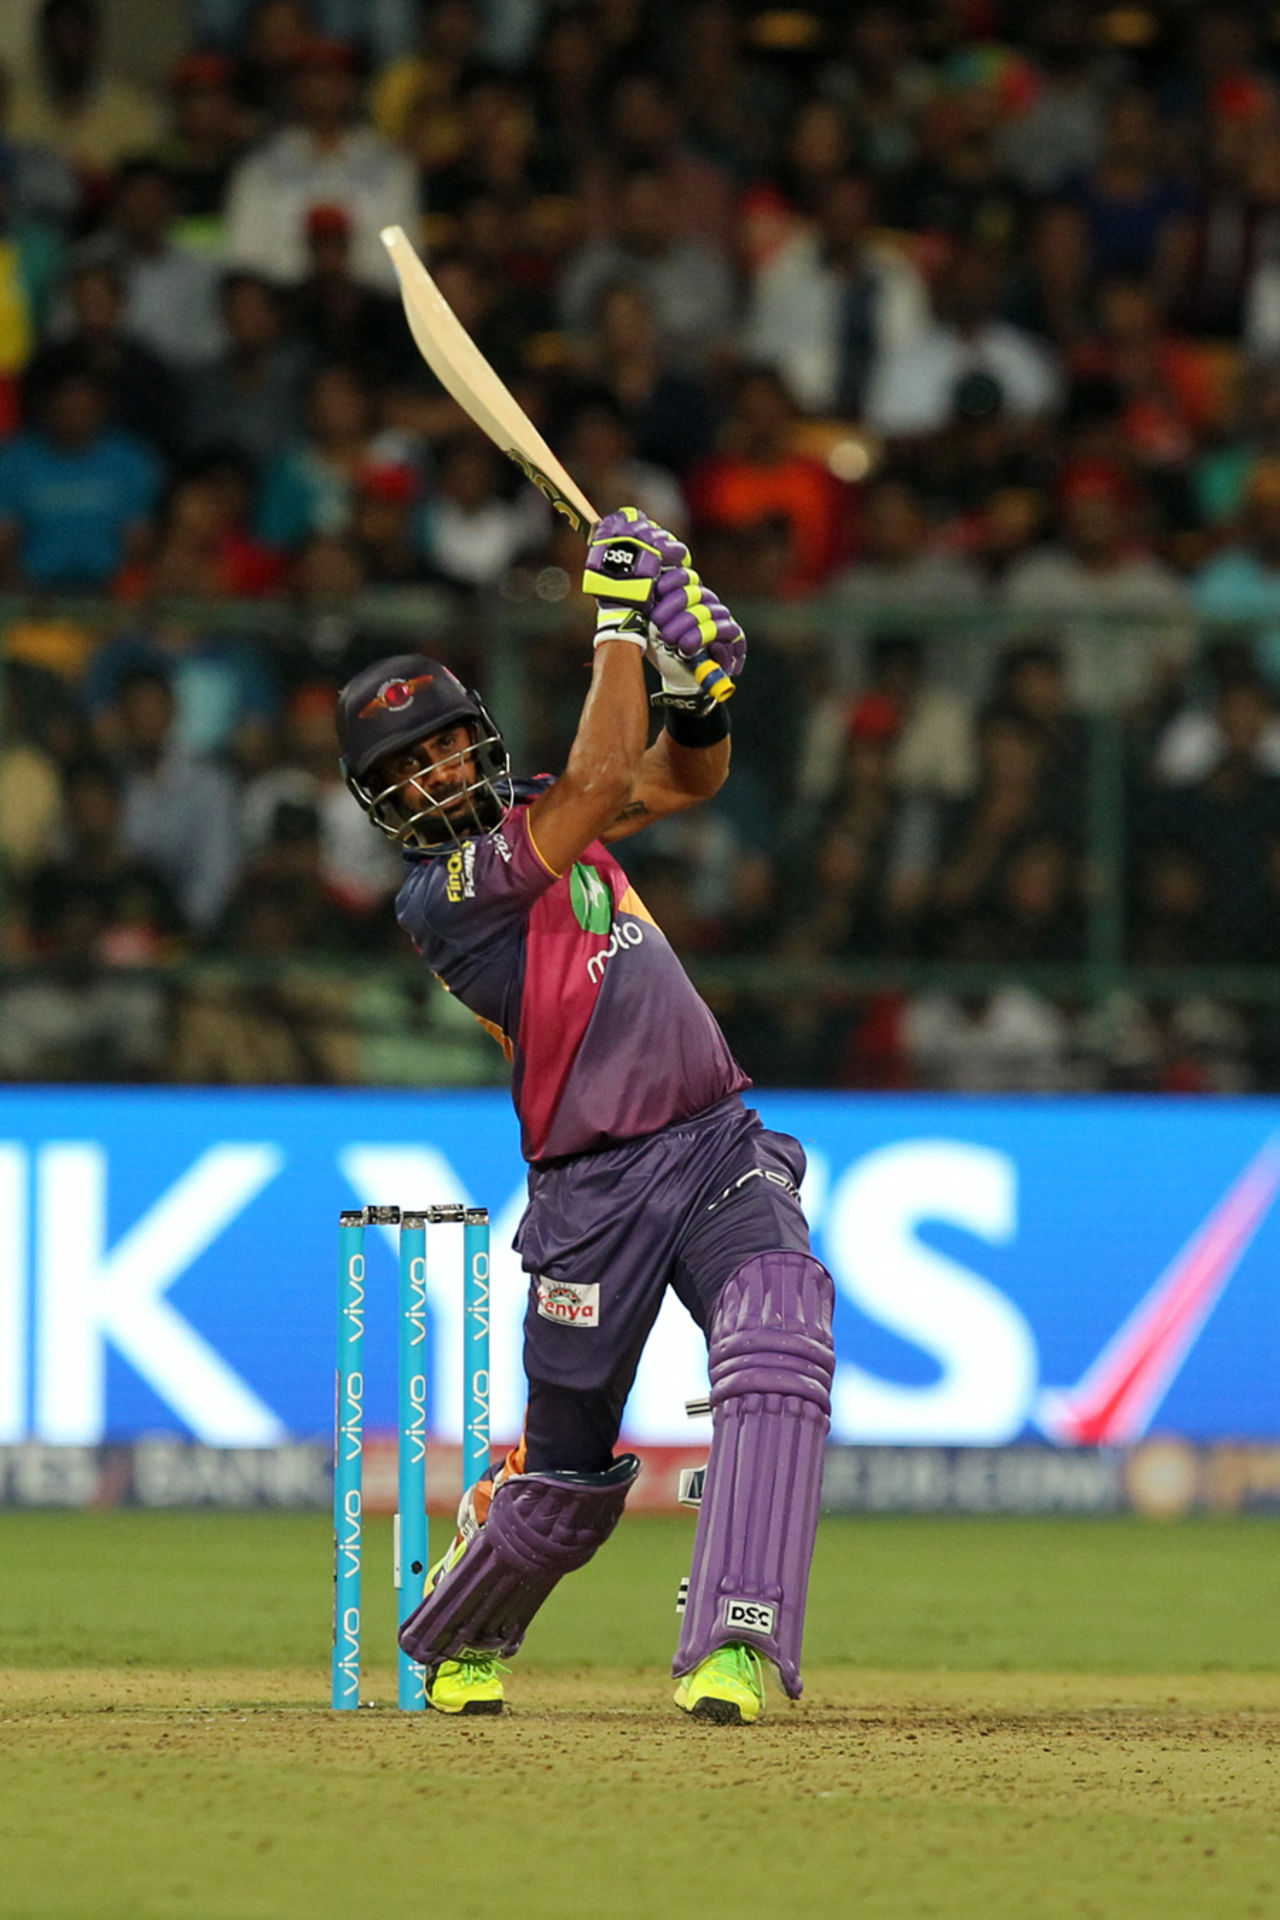 Manoj Tiwary holds the pose after hitting a straight six, Royal Challengers v Rising Pune, IPL 2017, Bengaluru, April 16, 2017